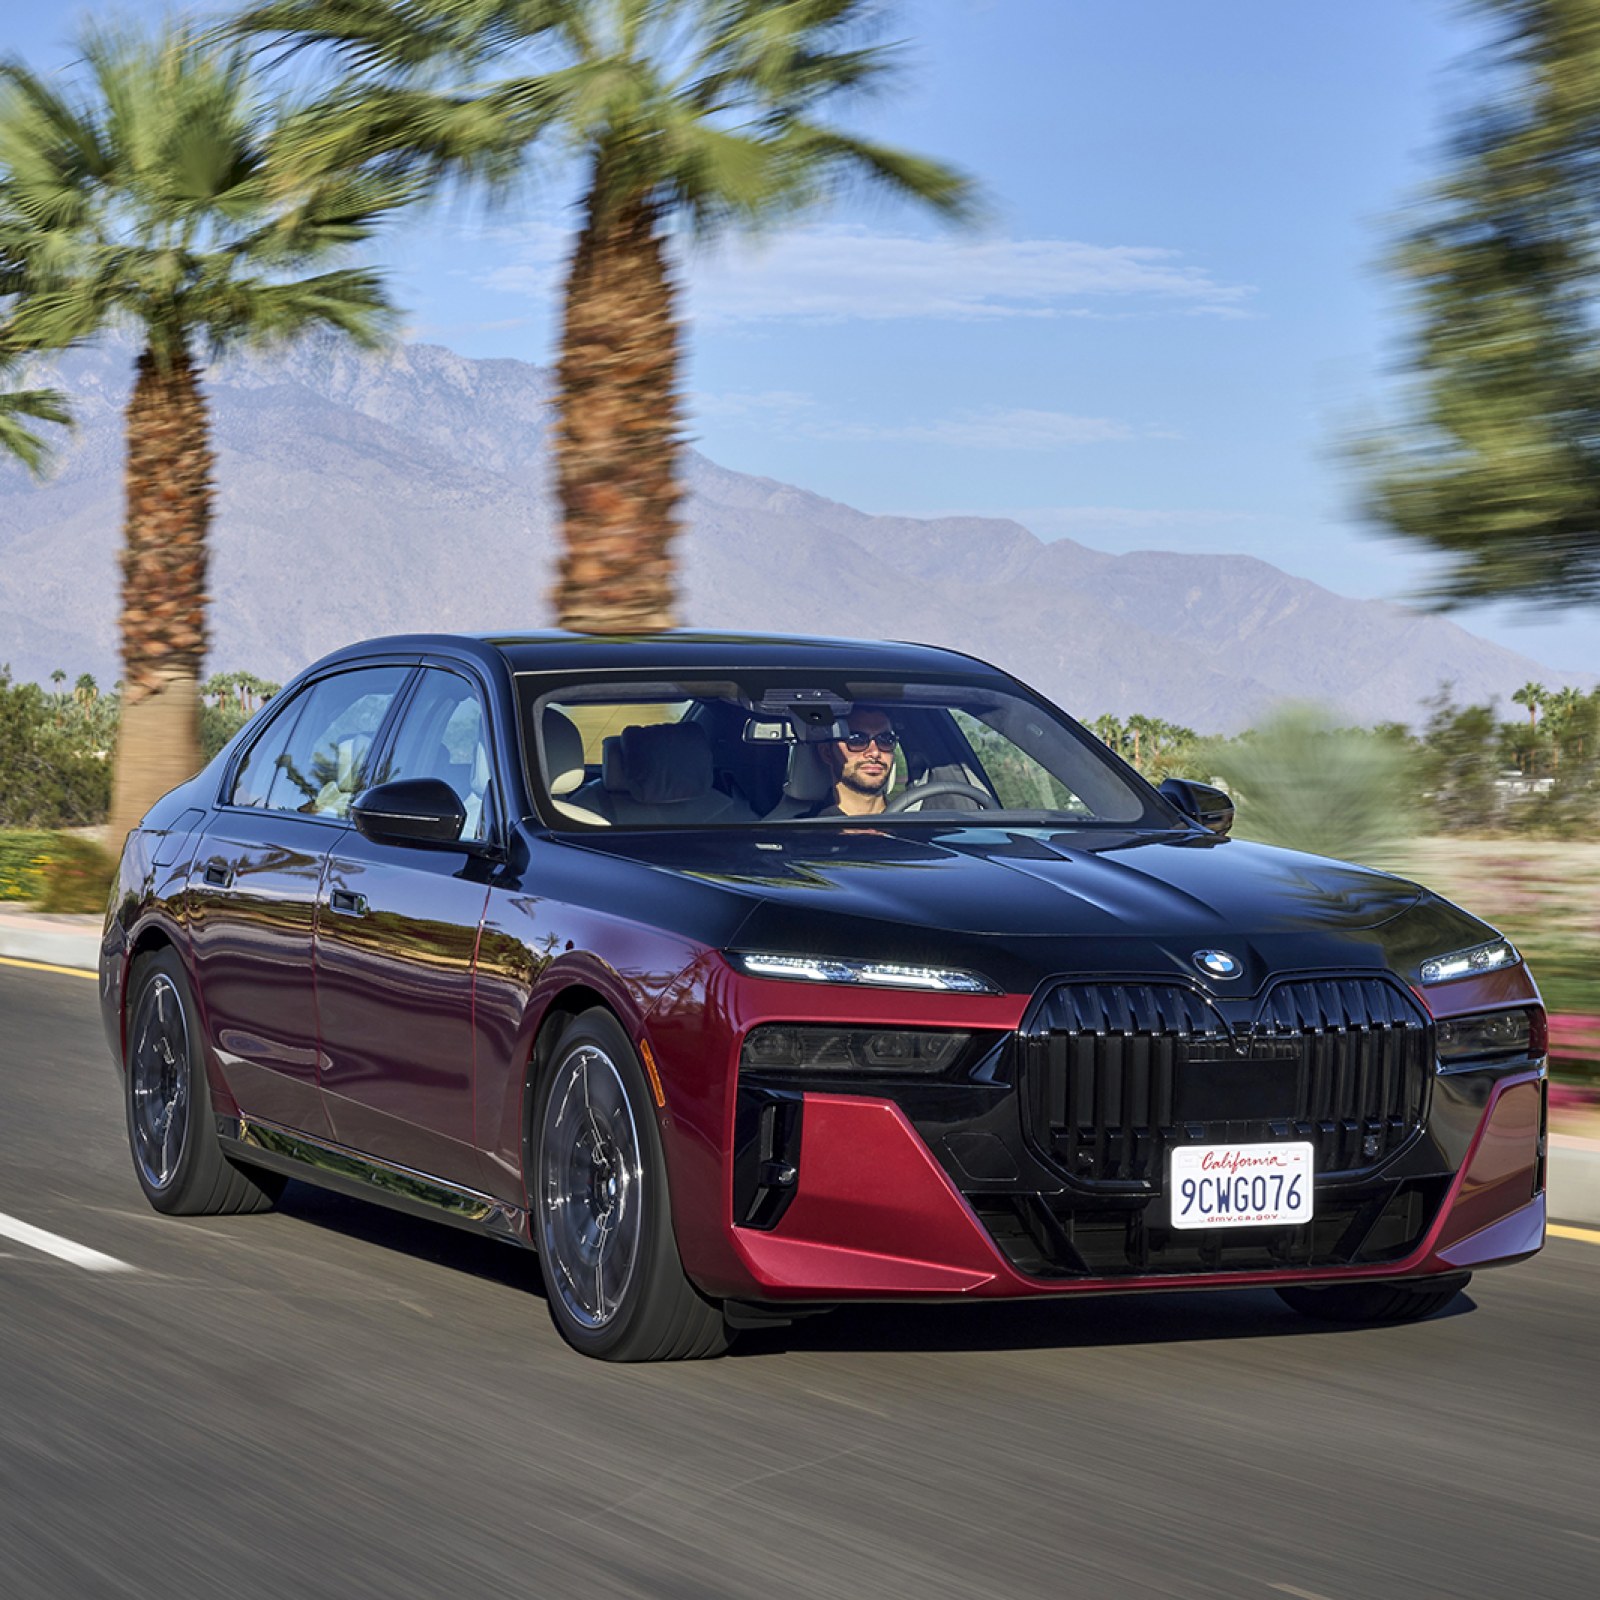 2023 BMW 760i Review: Some Frills, But Less Desirable